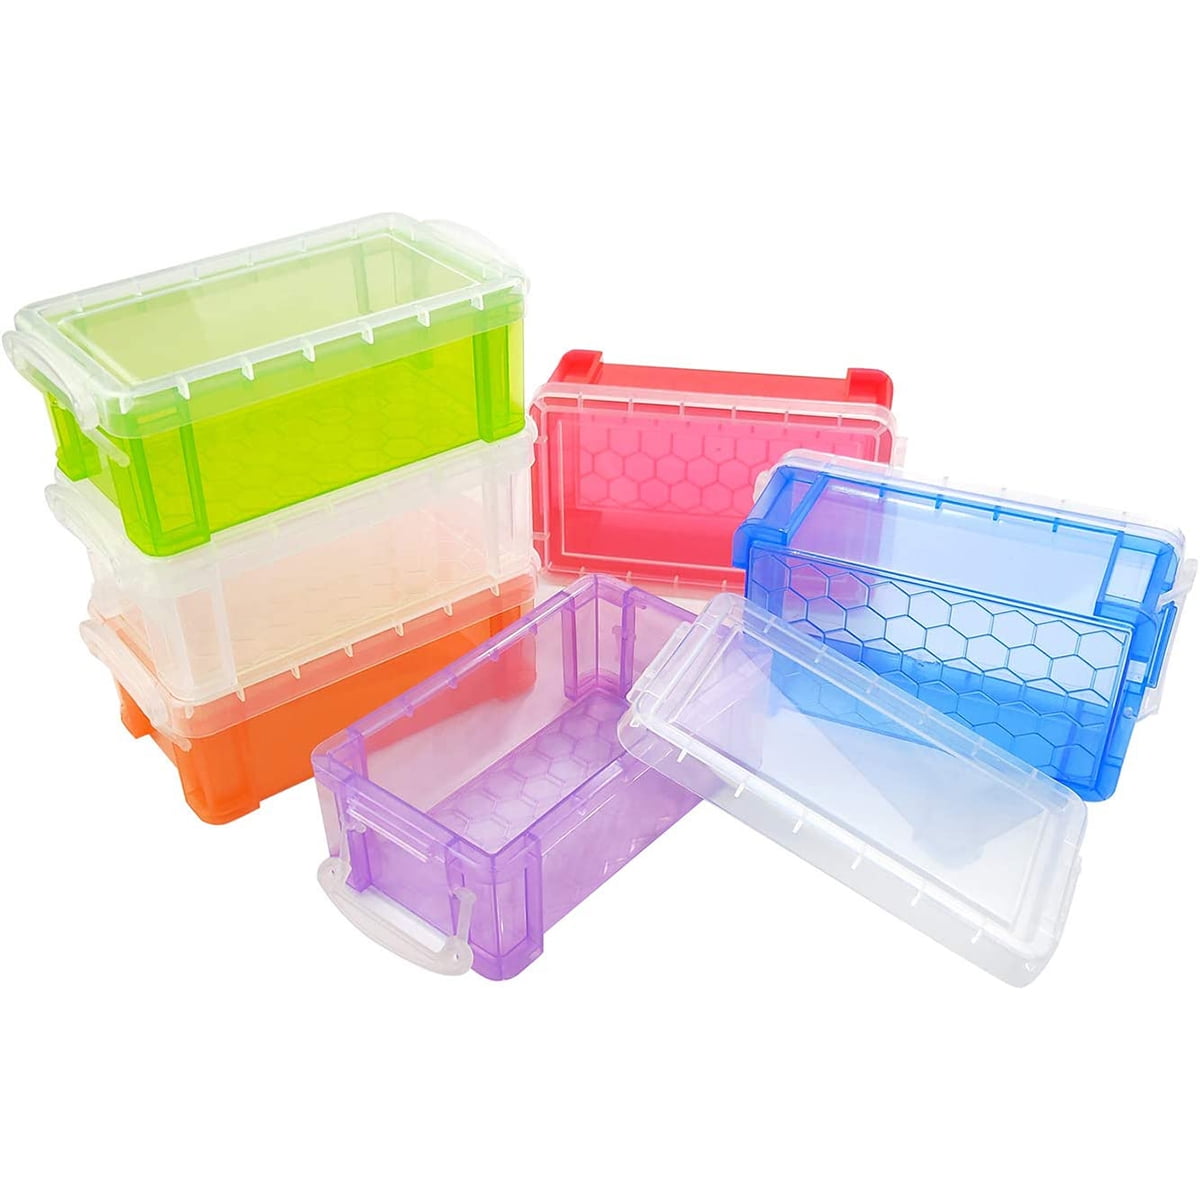 BILLIOTEAM 6 Pack Plastic Small Multi Colorful Crayon Box,5.31 x 2.95 x  1.97,Stackable Translucent Sewing Fishing Tool Storage Case Container